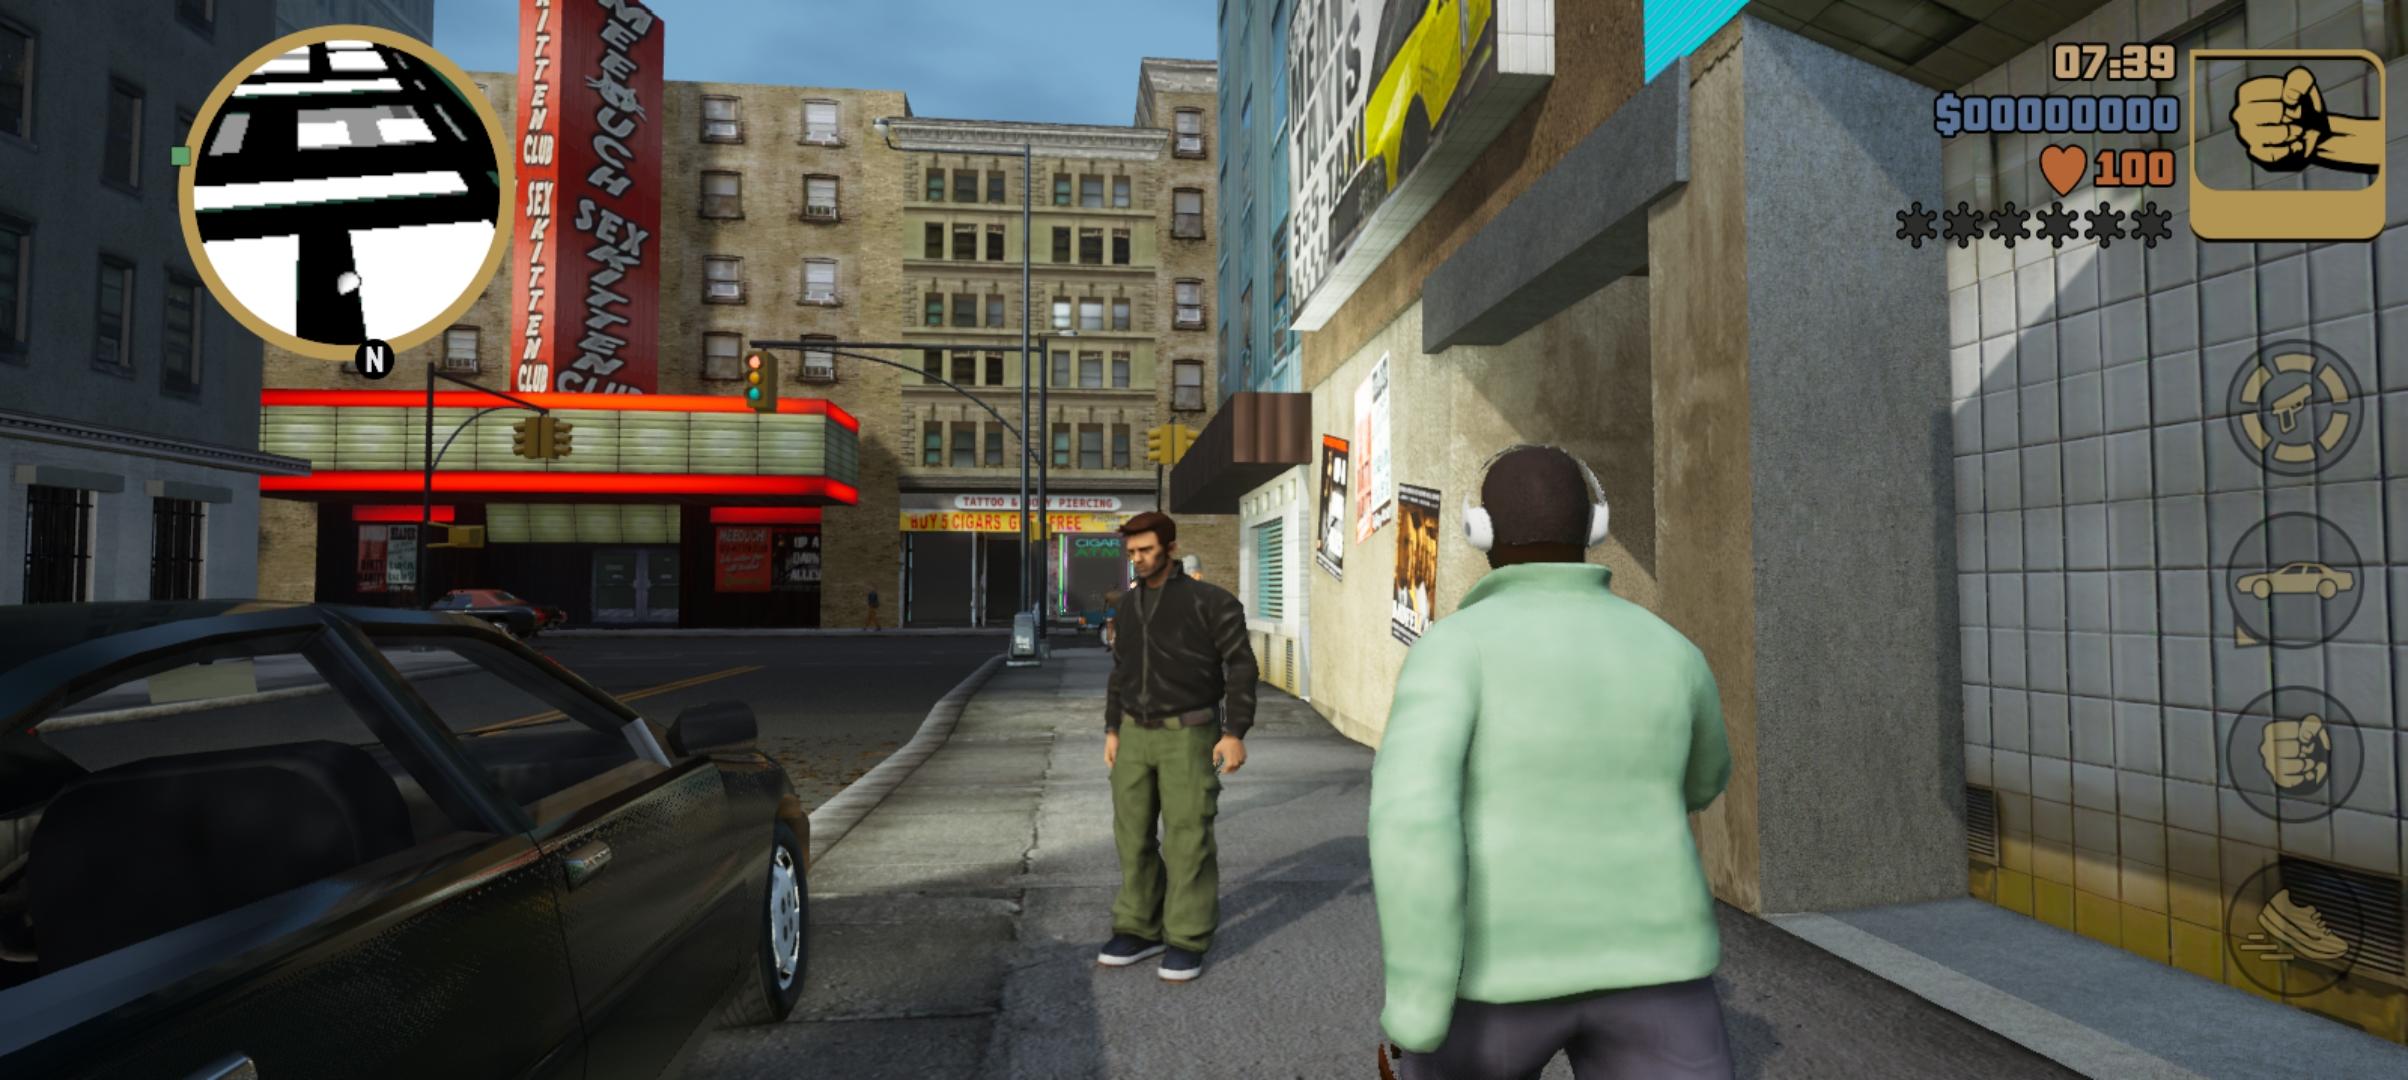 GTA III – NETFLIX APK (Android Game) - Free Download